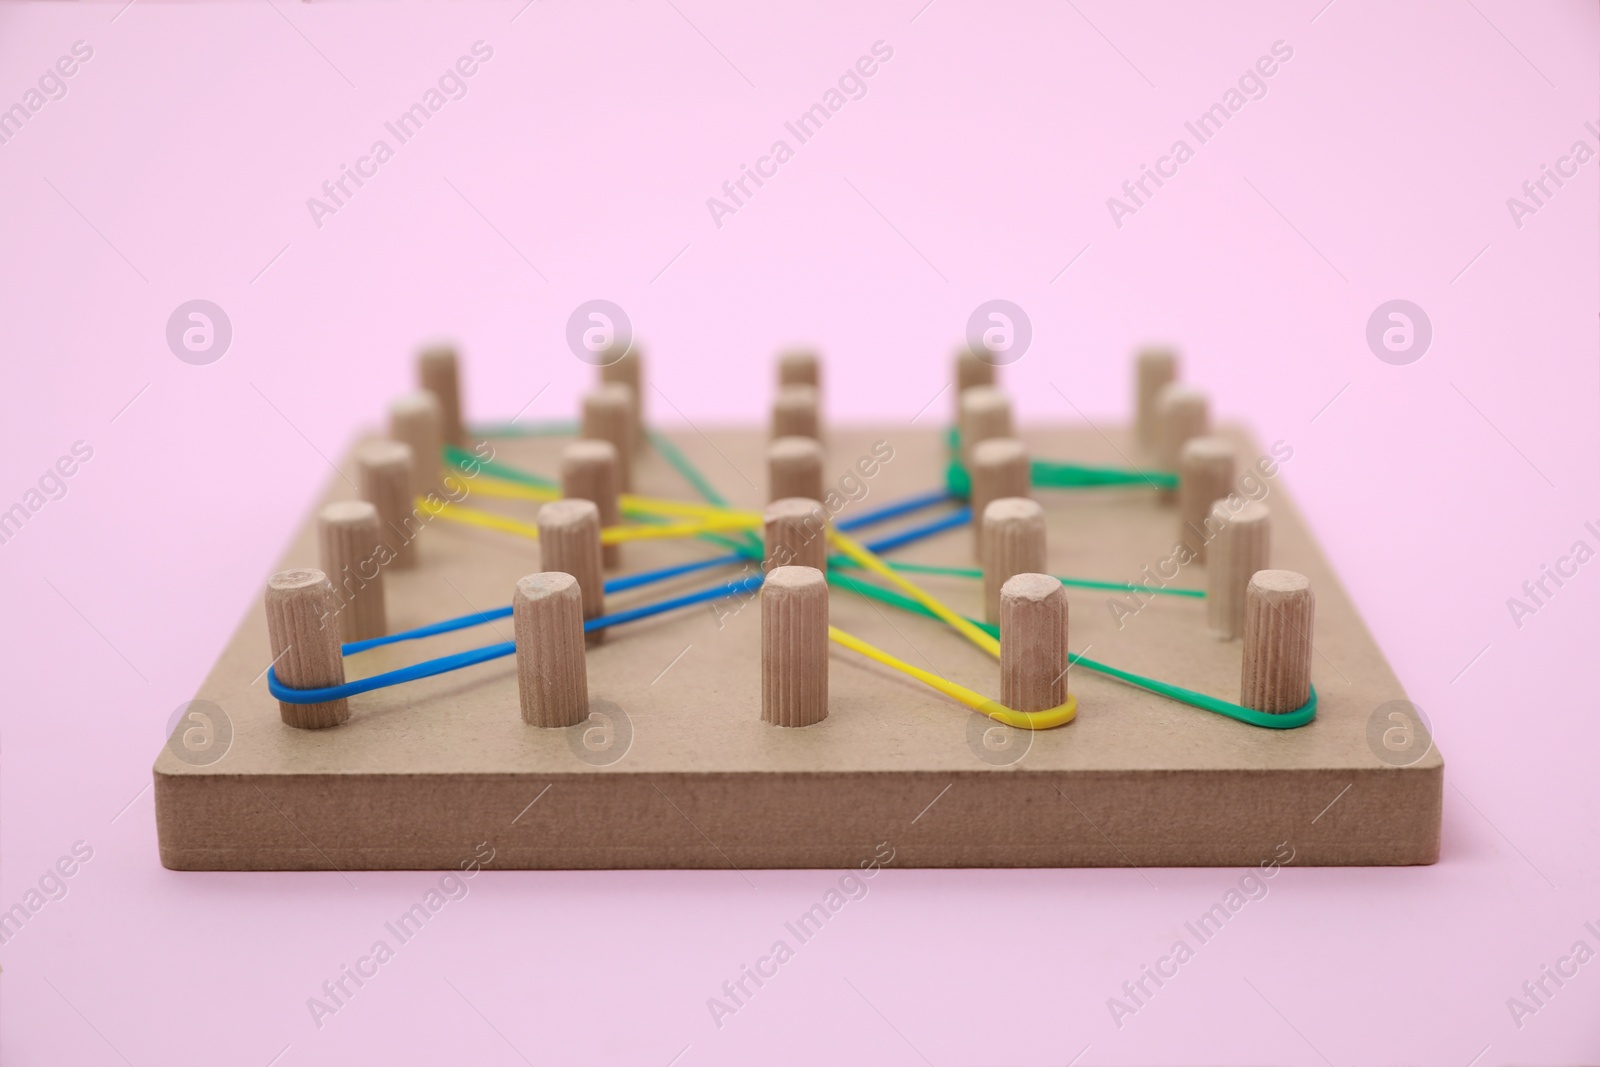 Photo of Wooden geoboard with dragonfly shape made of rubber bands on pink background, closeup. Educational toy for motor skills development